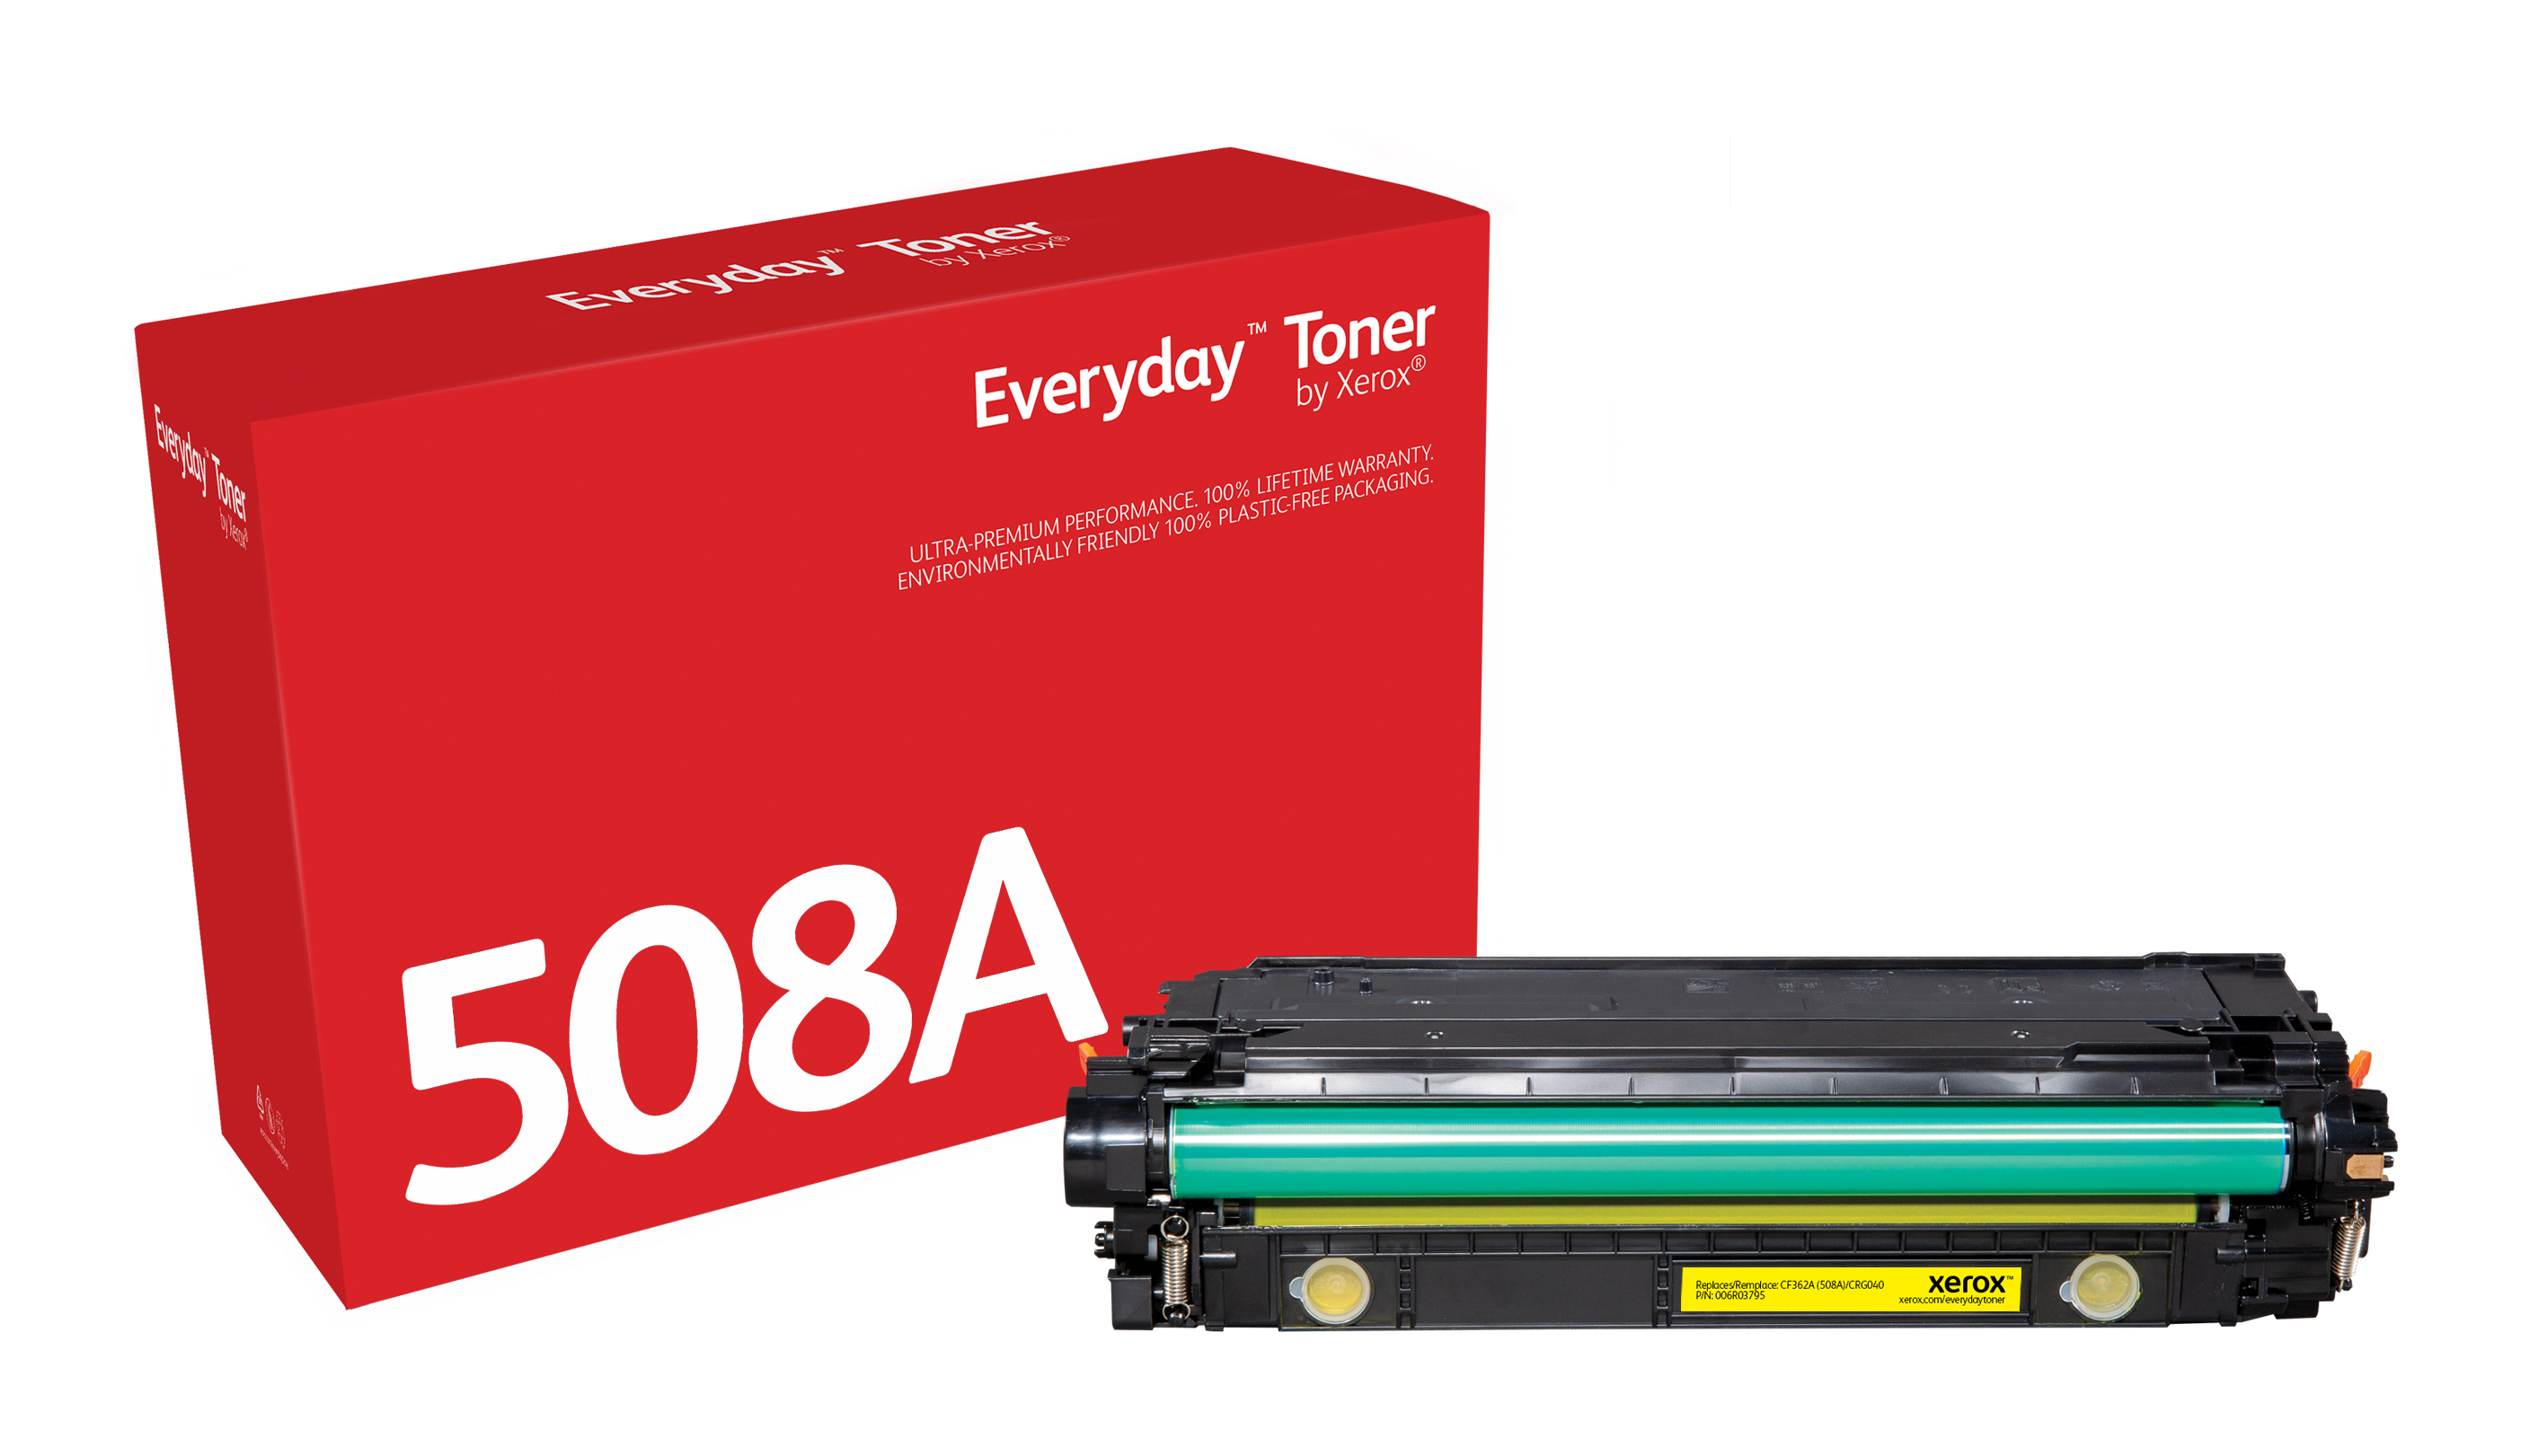 Toner Everyday Jaune compatible avec HP 508A (CF362A/ CRG-040Y) 006R03795  by Xerox